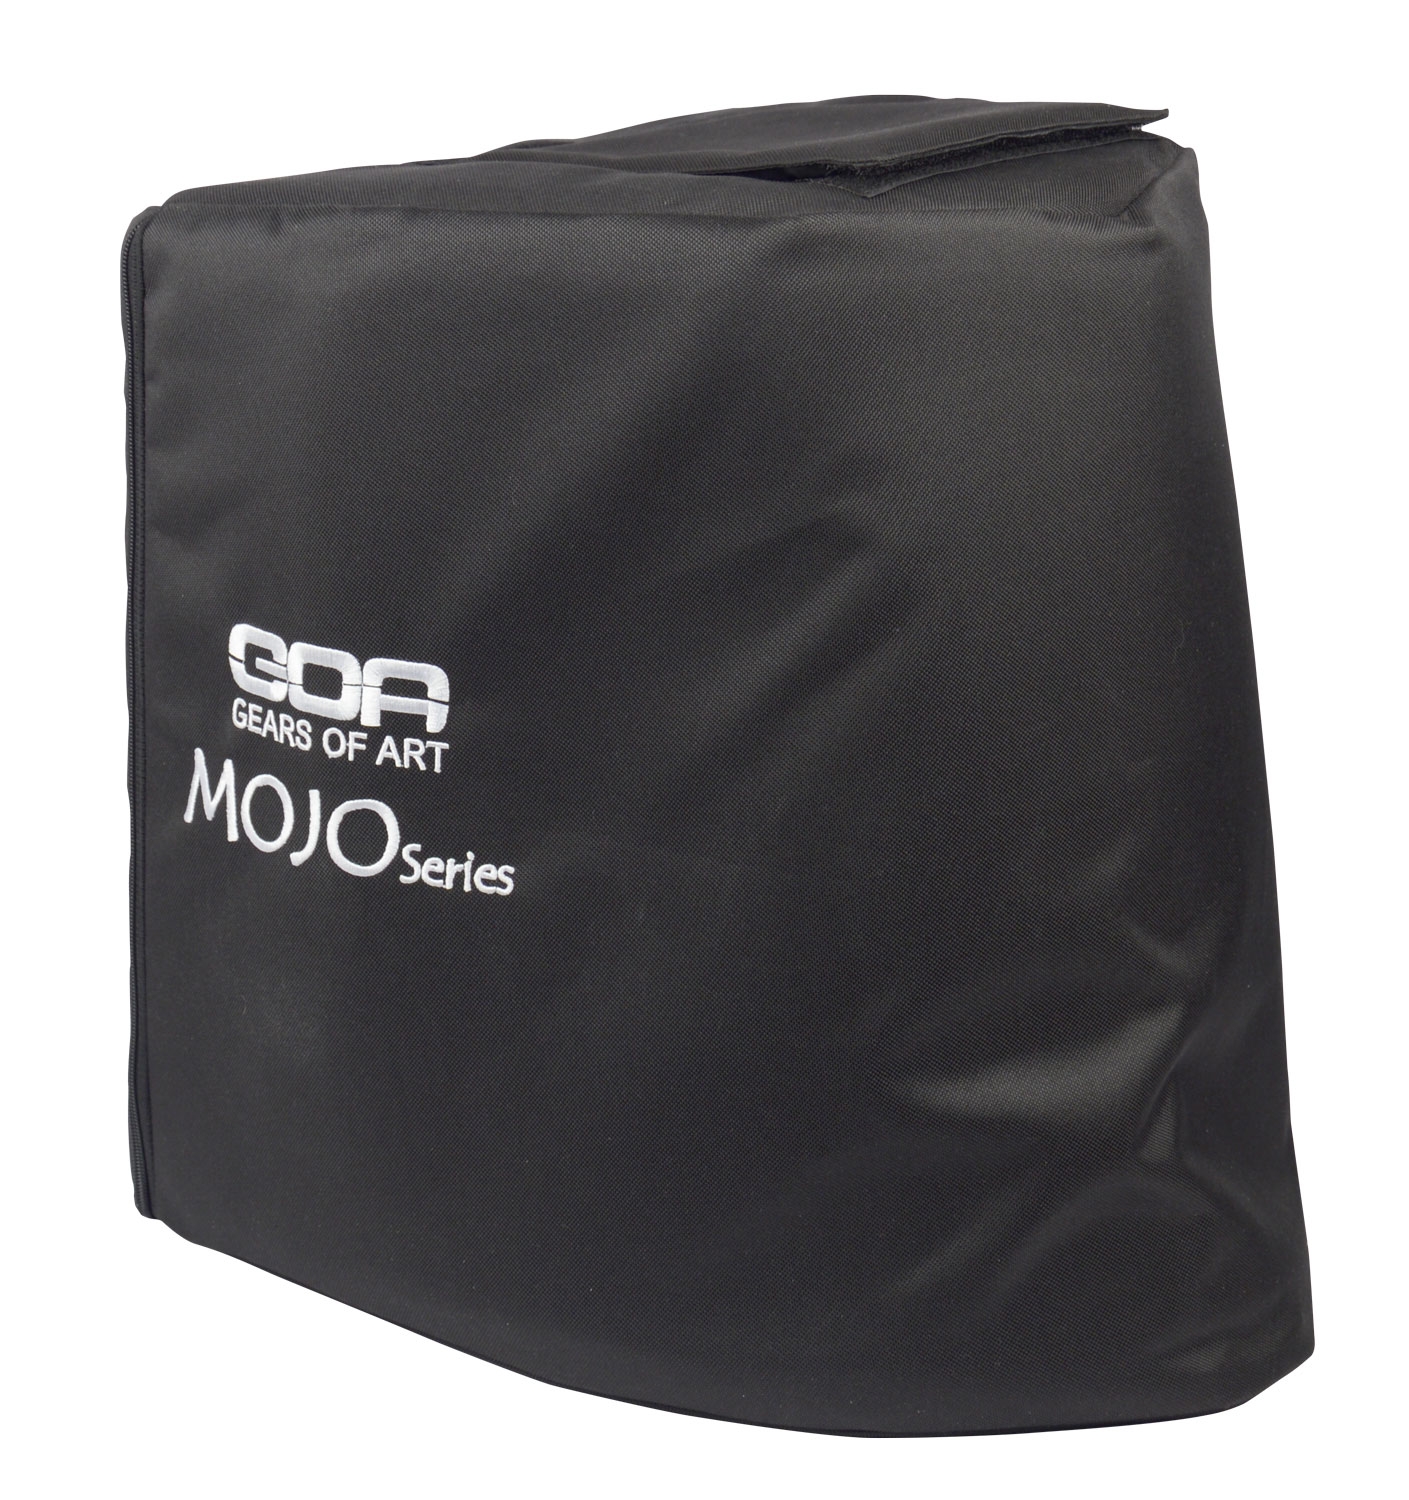 Protective cover for MOJO500LINE, MOJO500Liberty and MOJO500LineTWS subwoofer